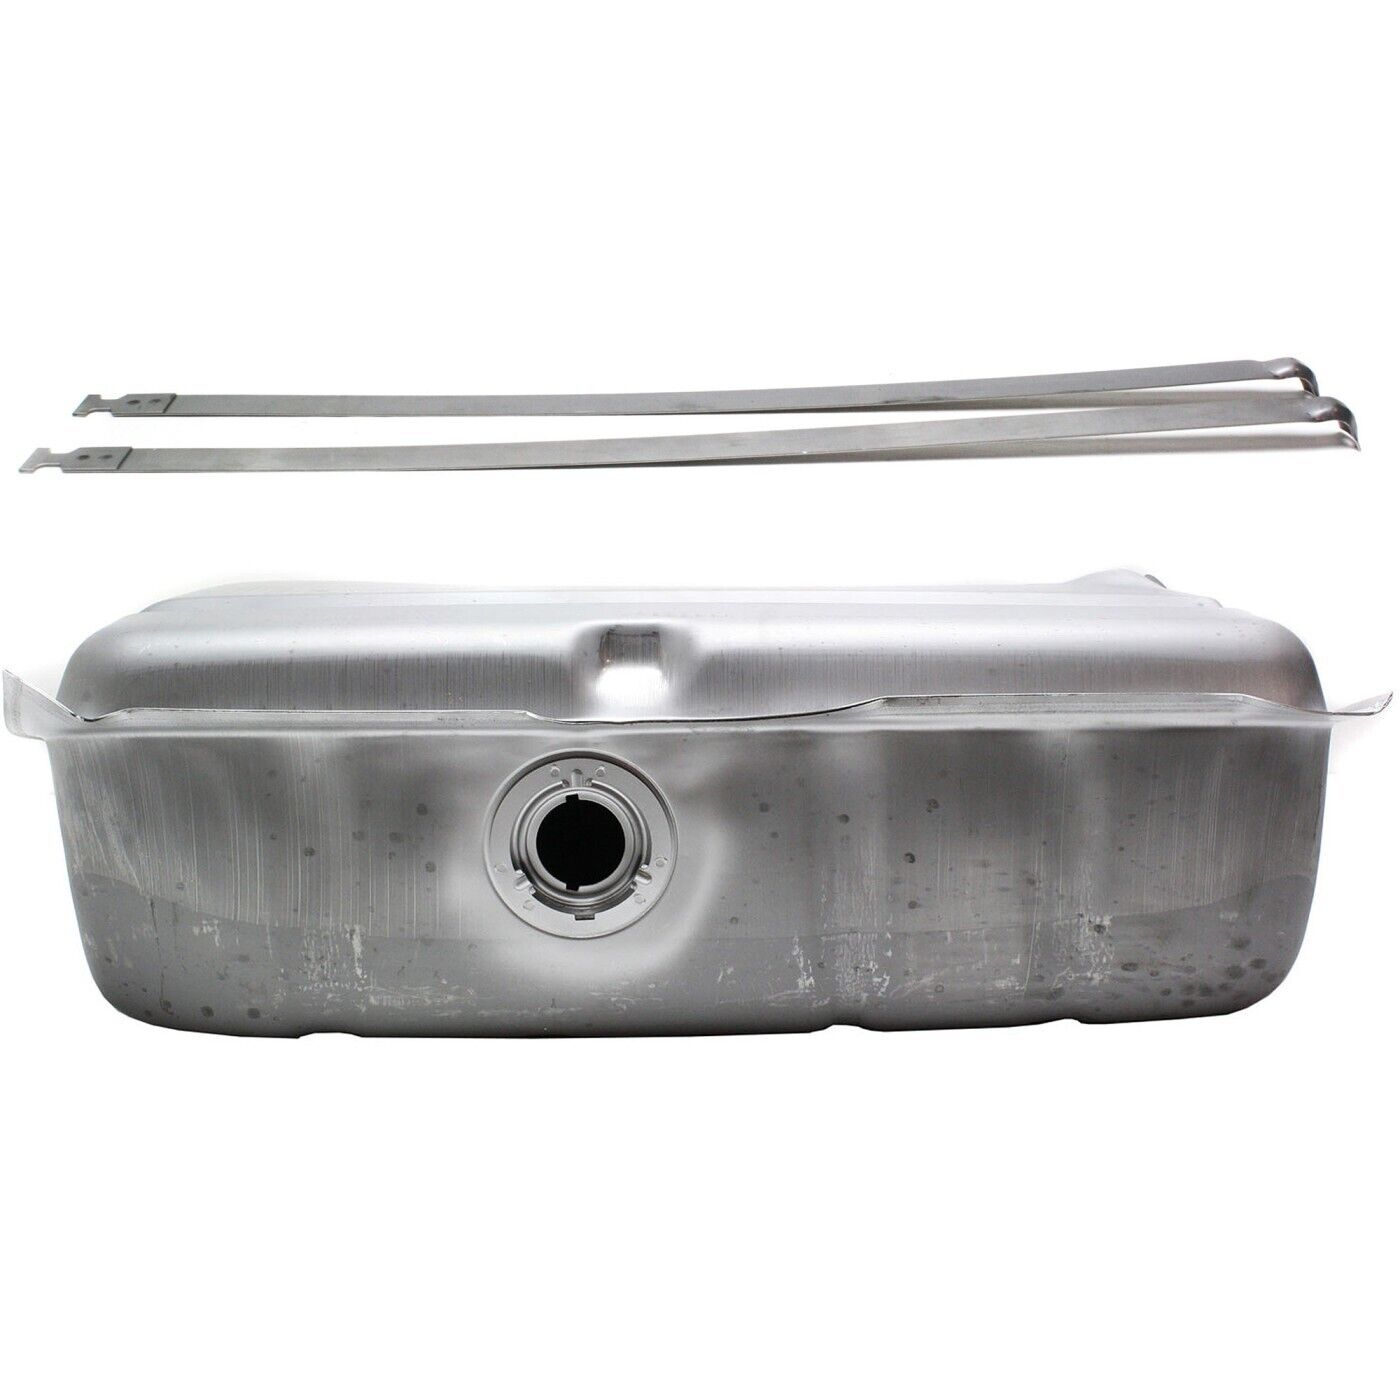 Fuel Tank Kit For 1968-70 Dodge Dart With Fuel Tank Strap 3Pc